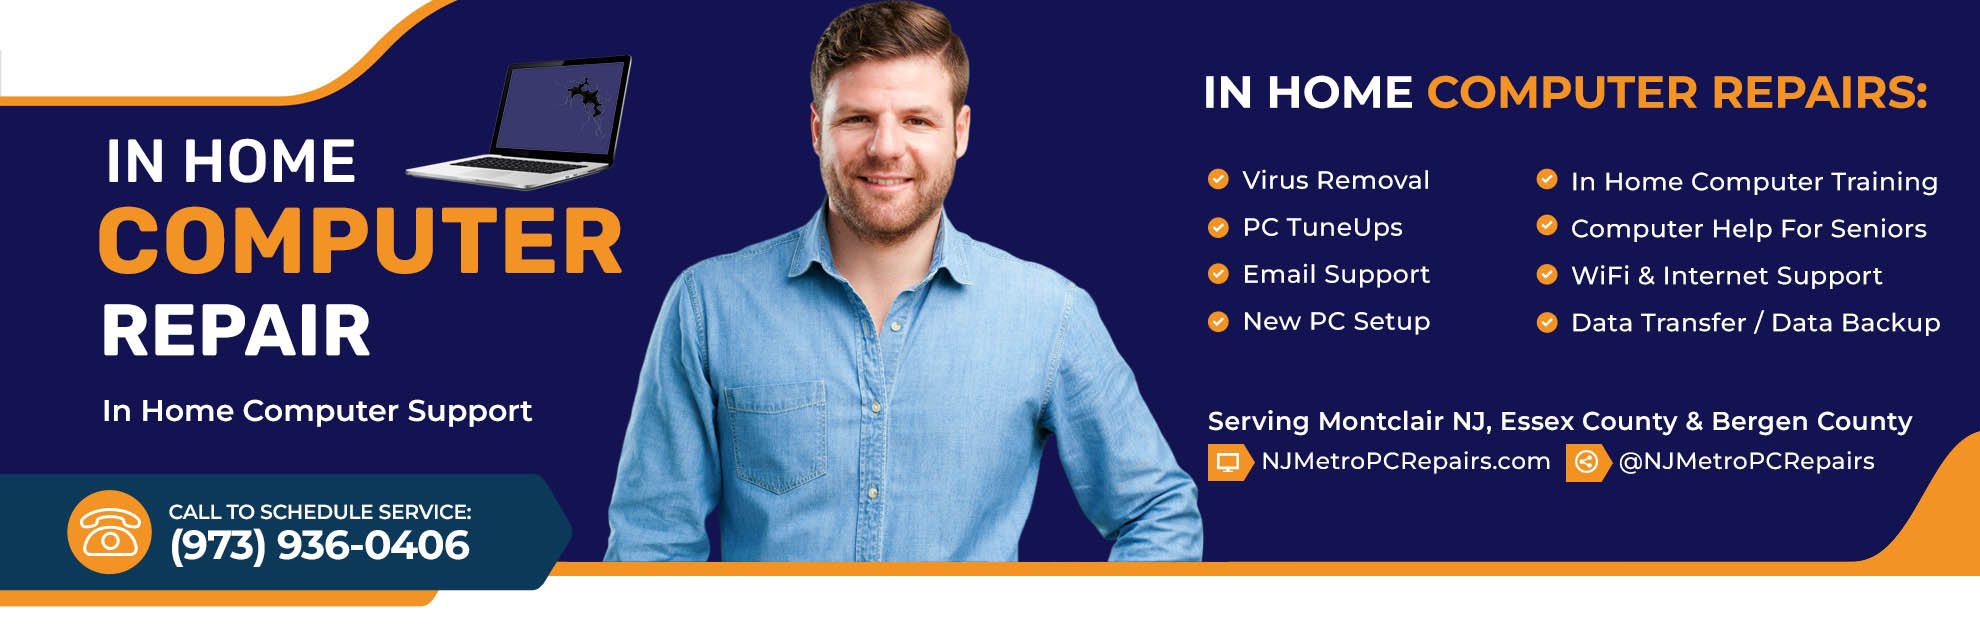 In Home Computer Repair Banner Image with Confident Smiling Computer Technician And A List Of In Home Computer Services Offered